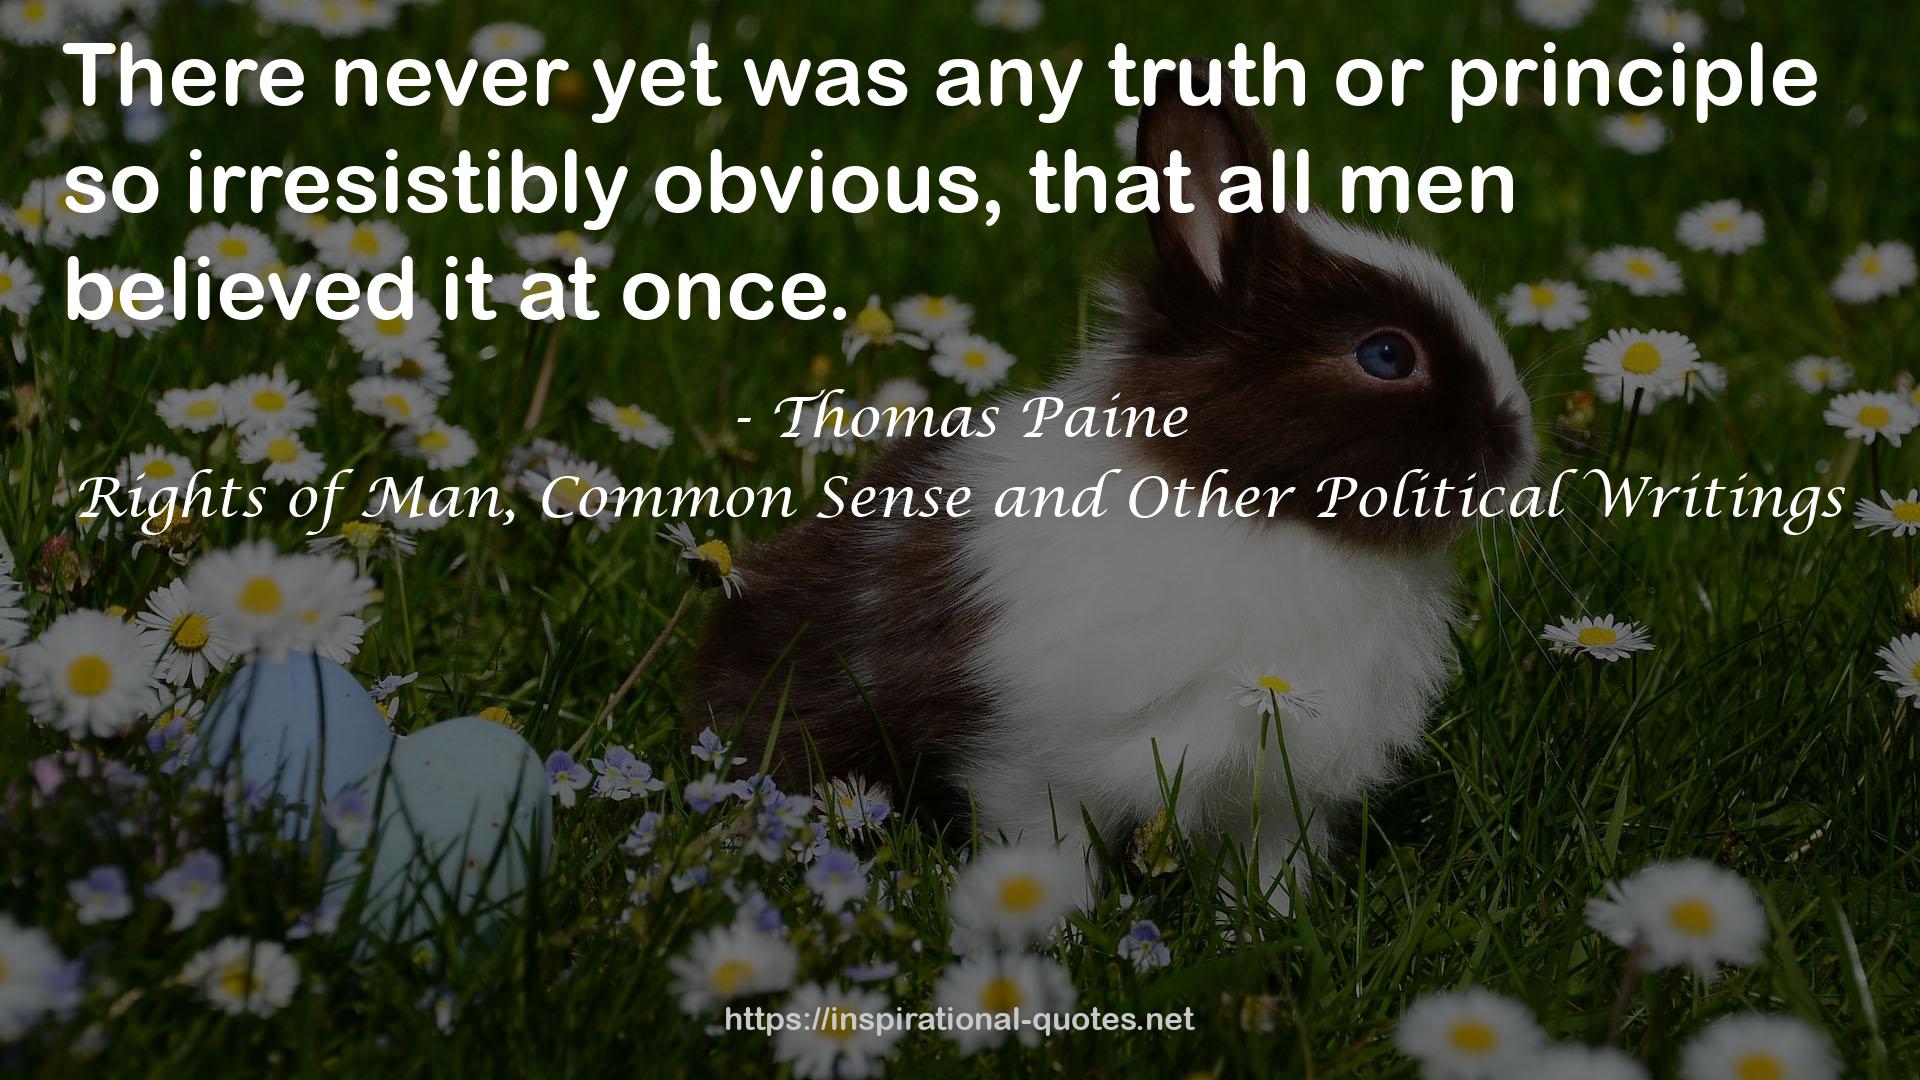 Rights of Man, Common Sense and Other Political Writings QUOTES